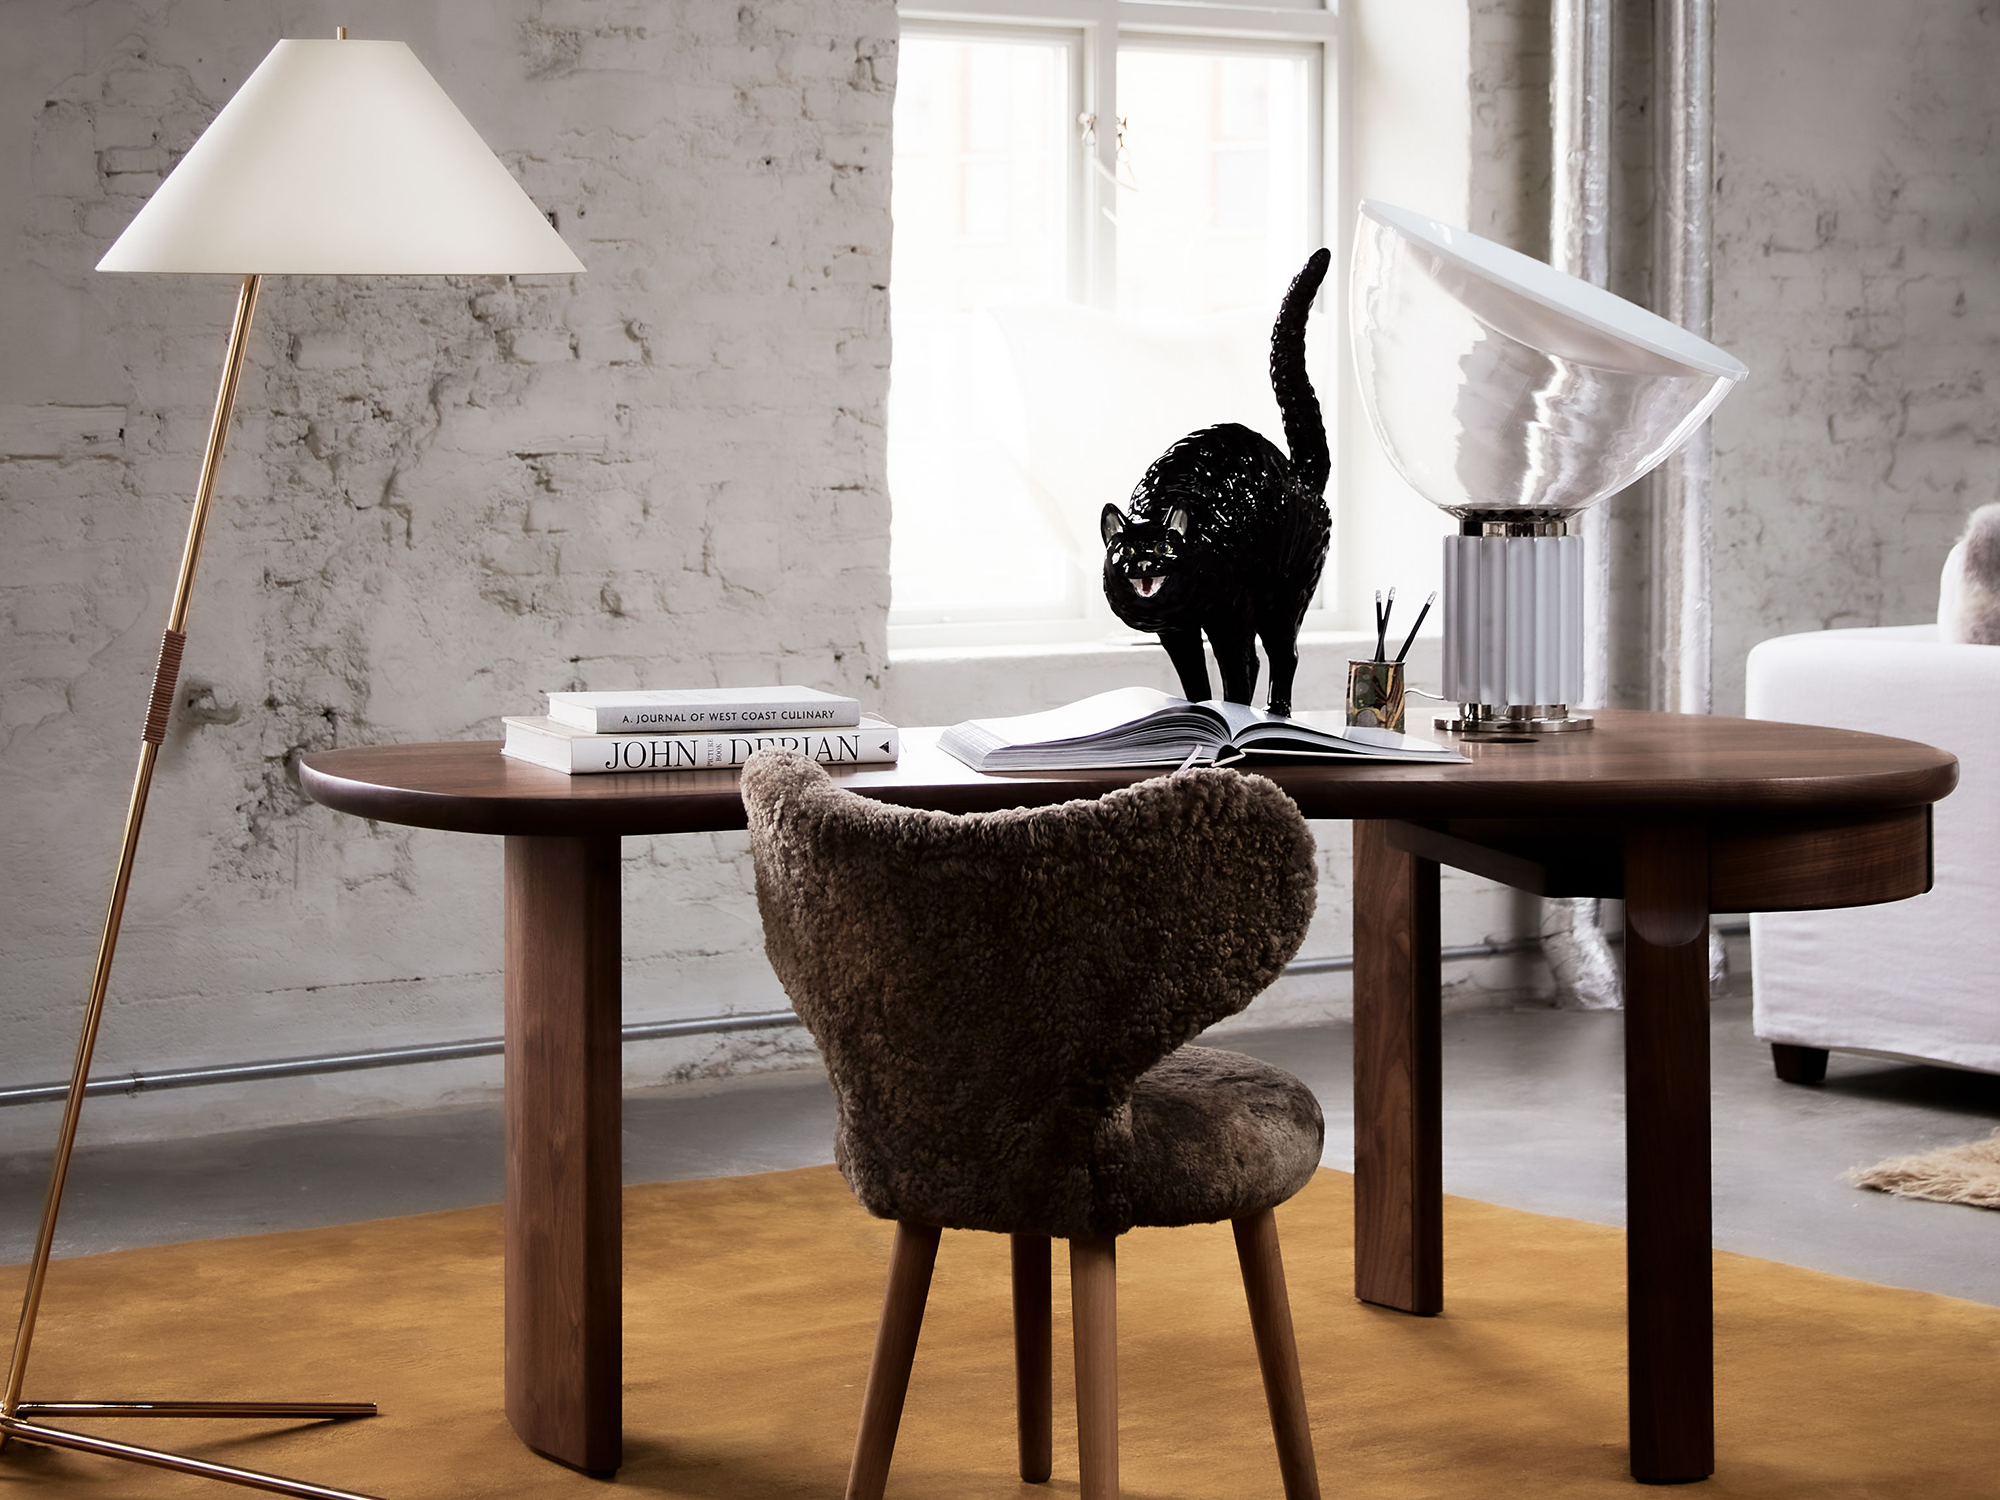 A dark wooden desk with some books, a lamp, a pencil holder, and a black cat sculpture on top of it. There is also a furry brown chair by the desk and floor lamp to the left of it.